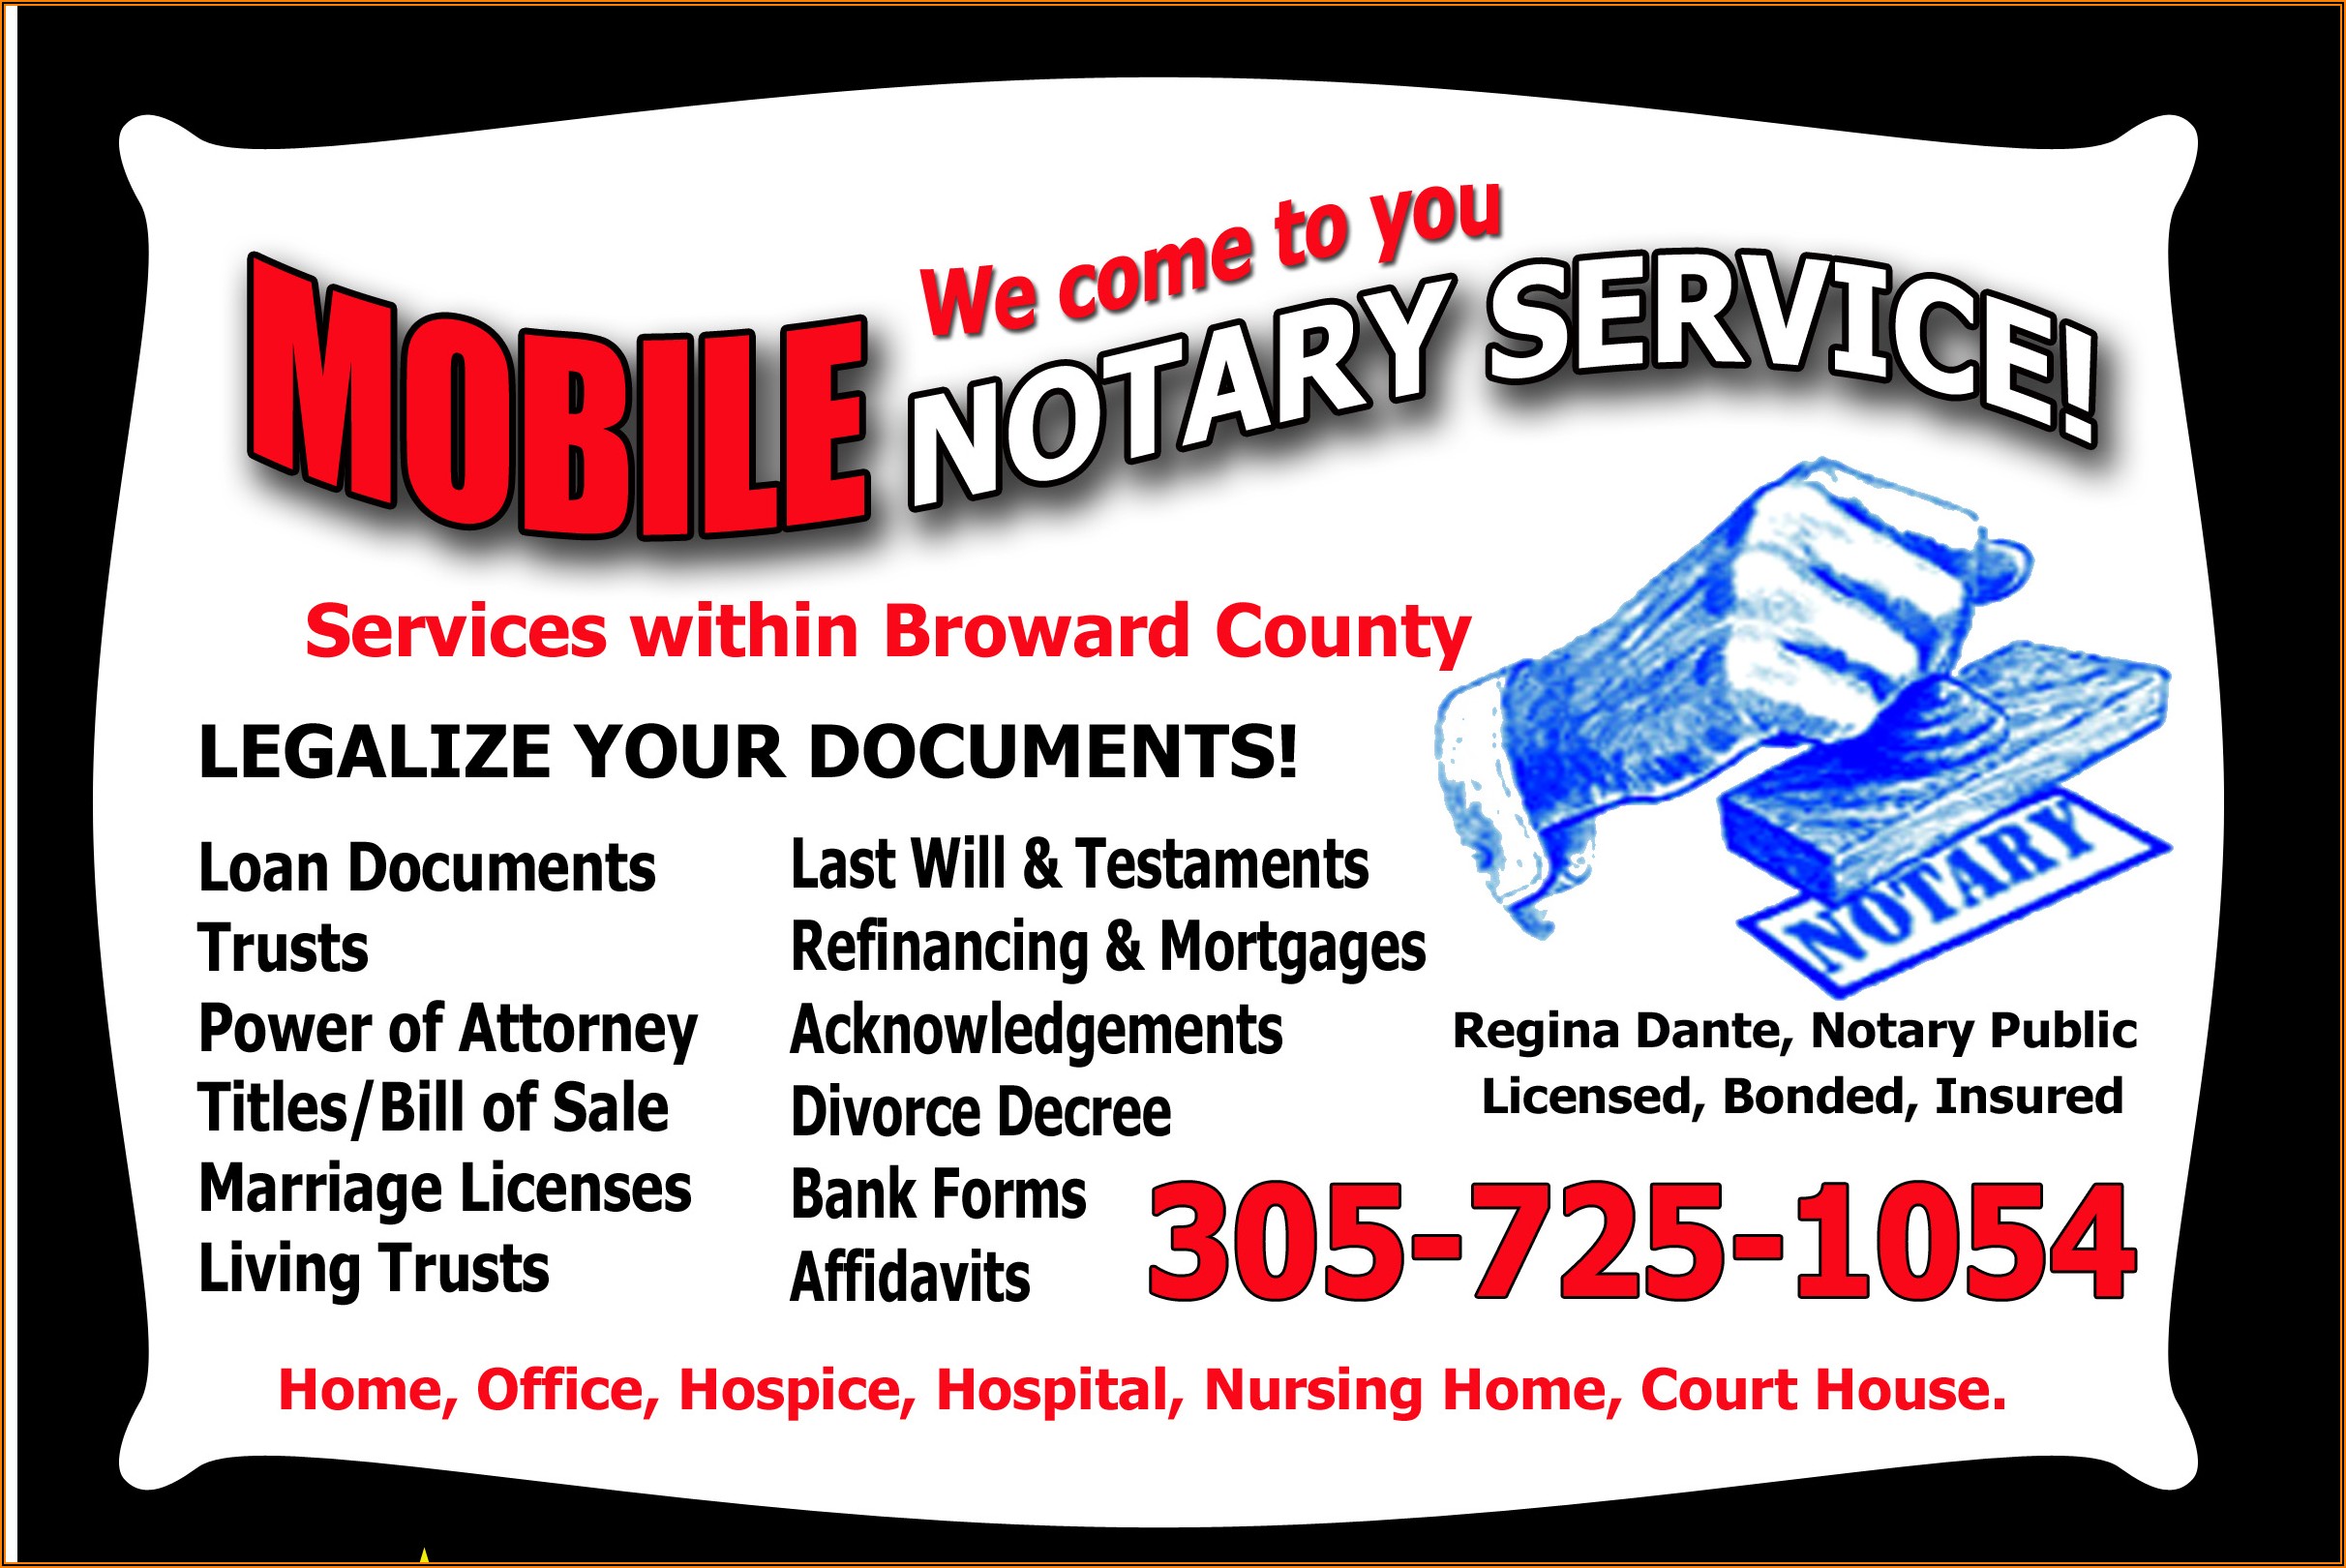 public notary business cards 1